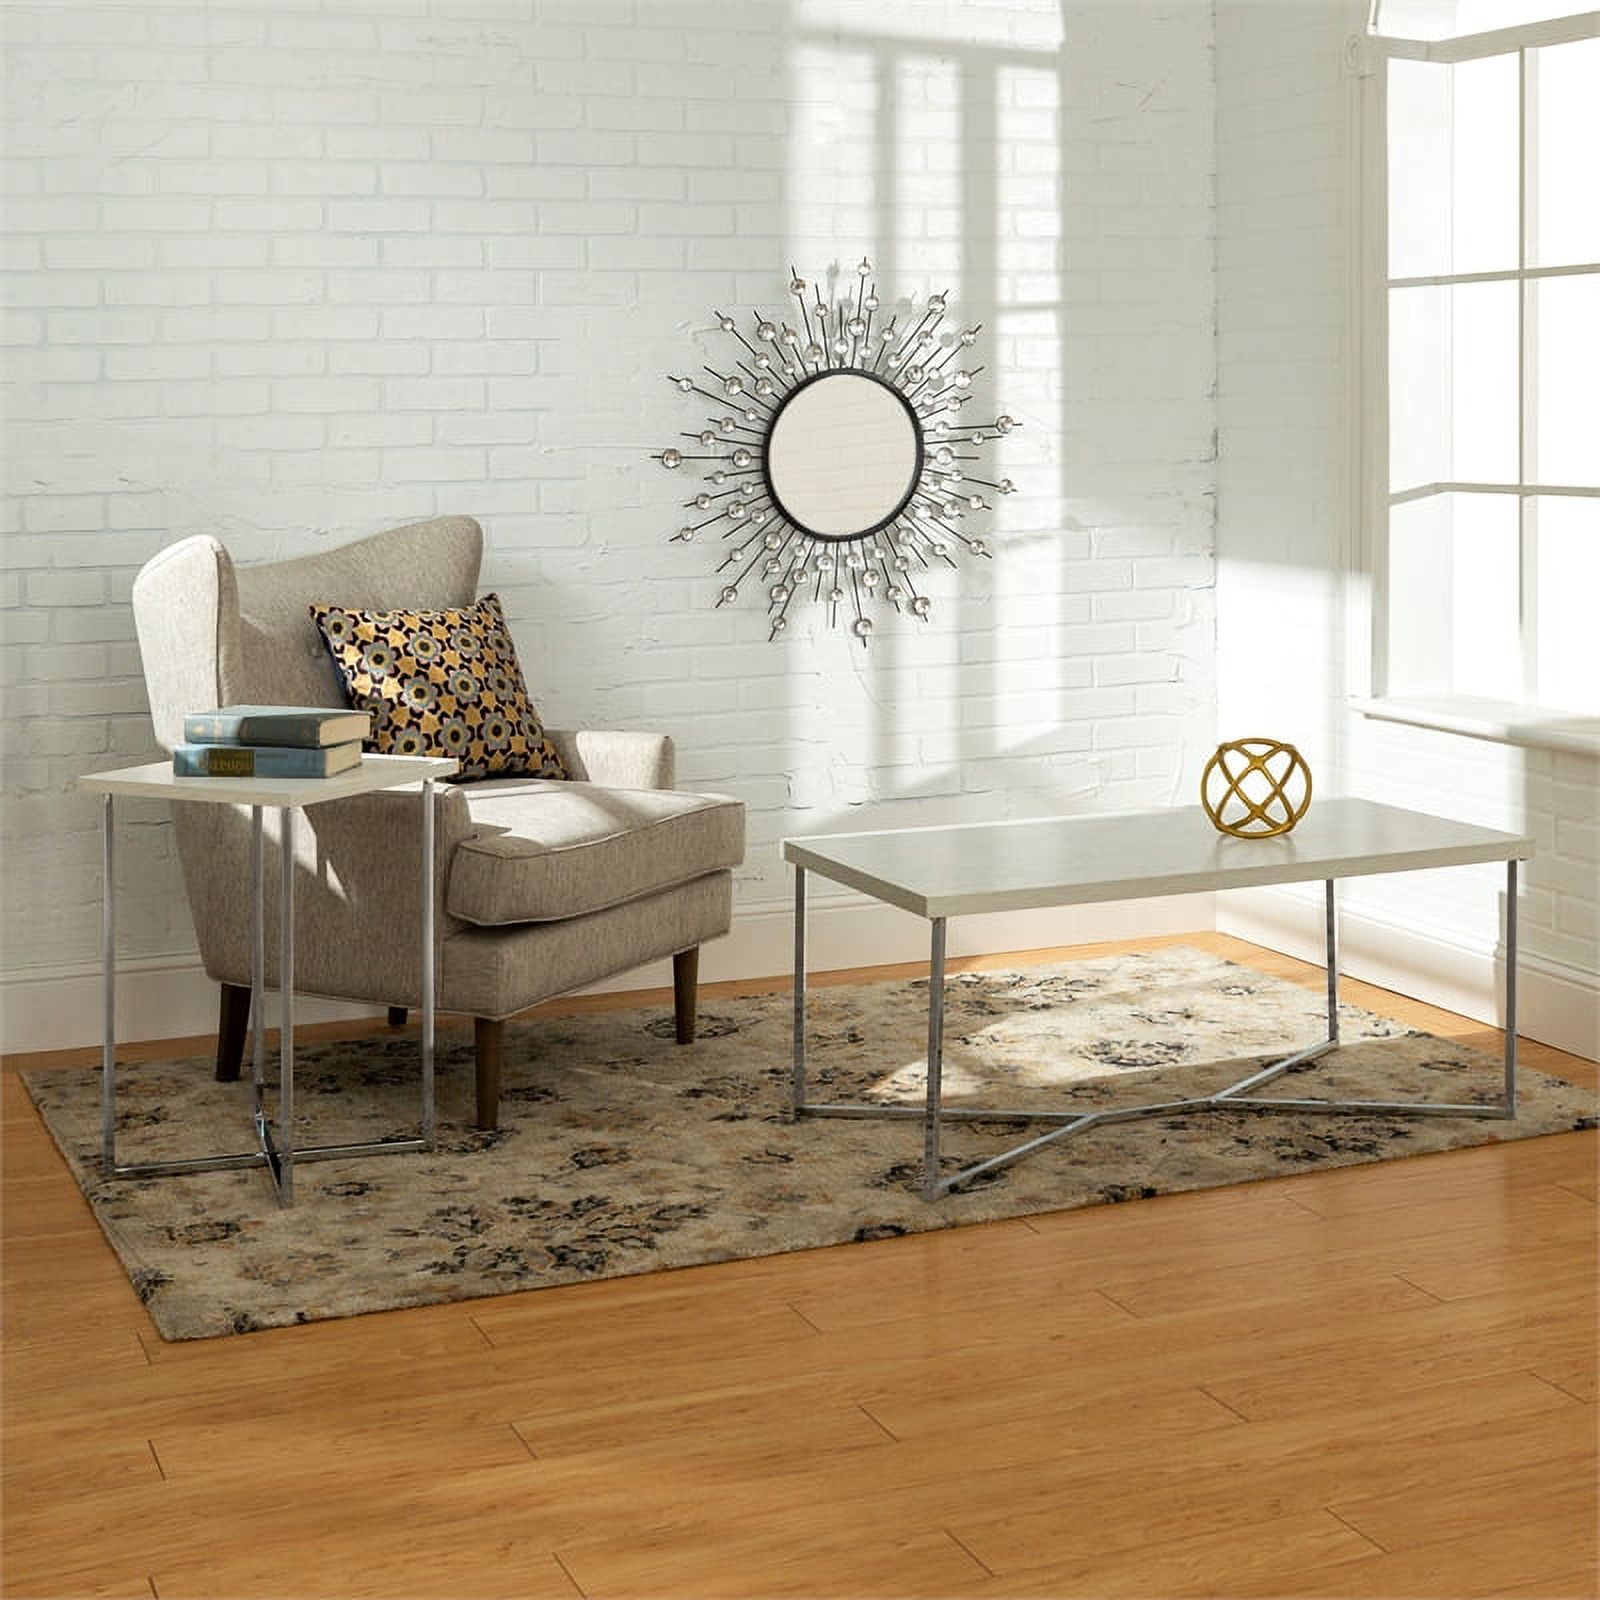 2-Piece Coffee Table Set - White Faux Marble and Chrome - image 2 of 2